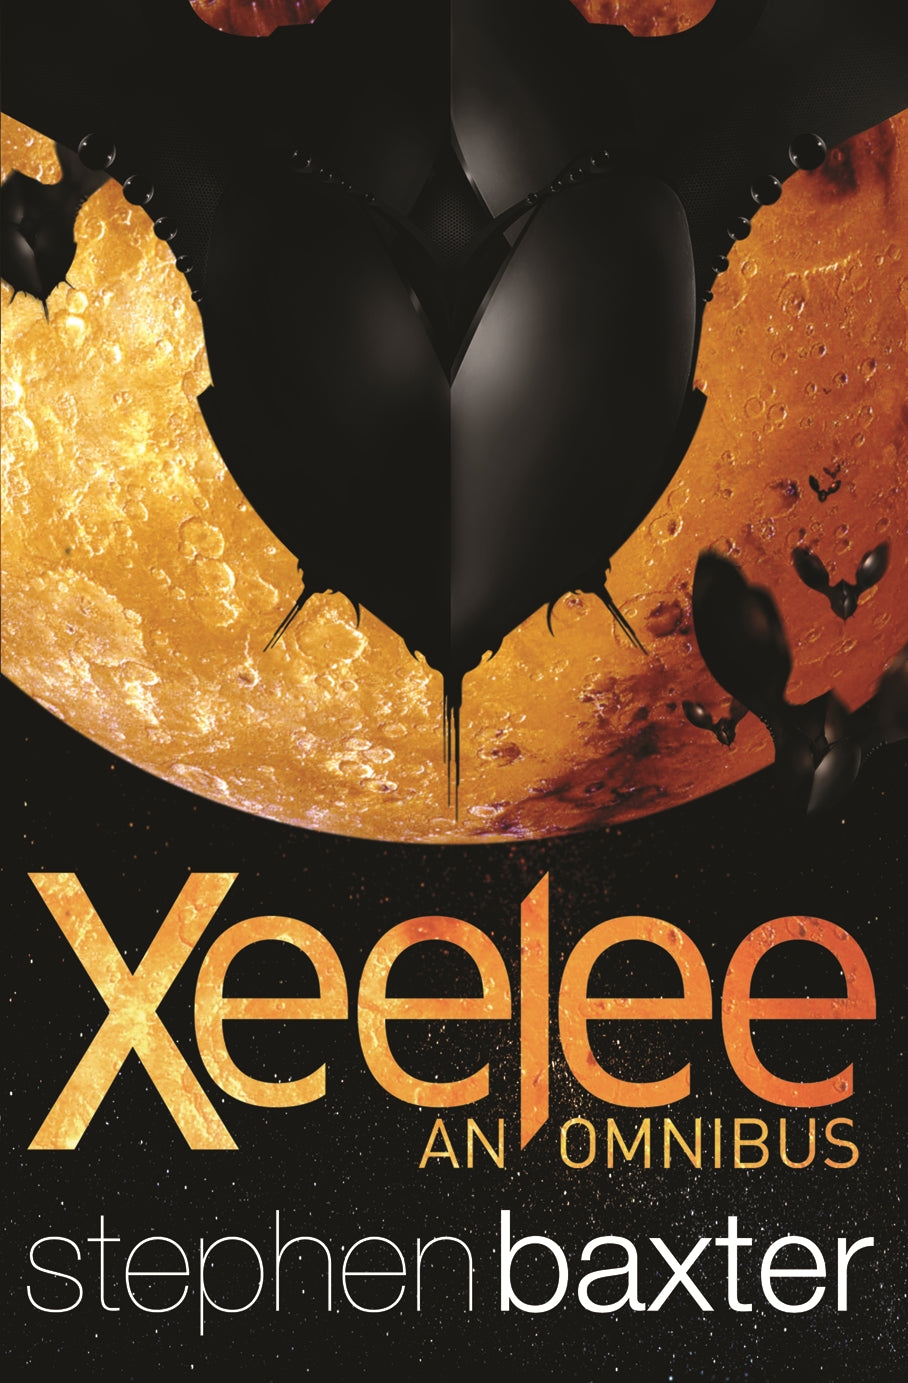 Xeelee: An Omnibus by Stephen Baxter